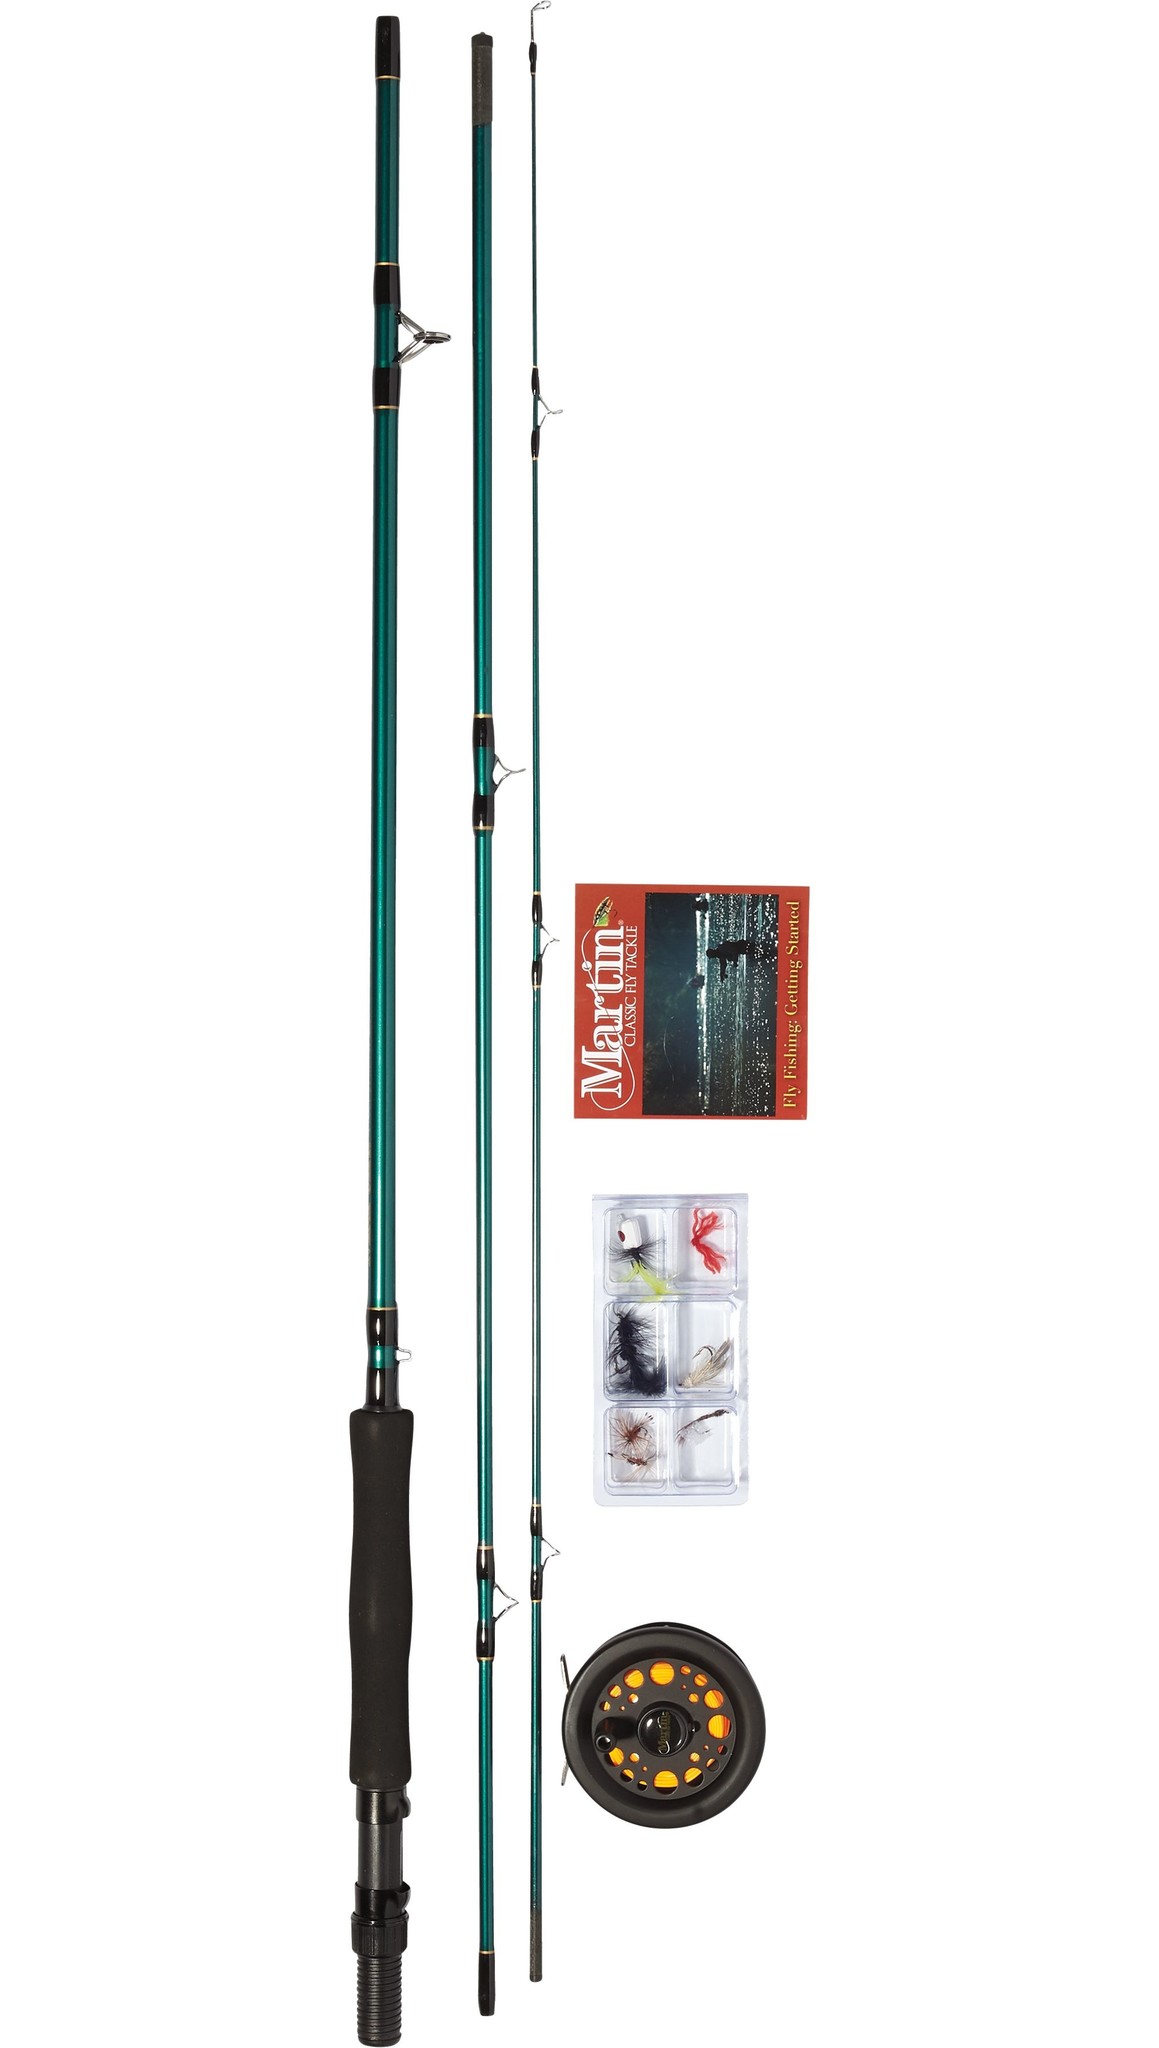 Martin Complete Fly Fishing Kit